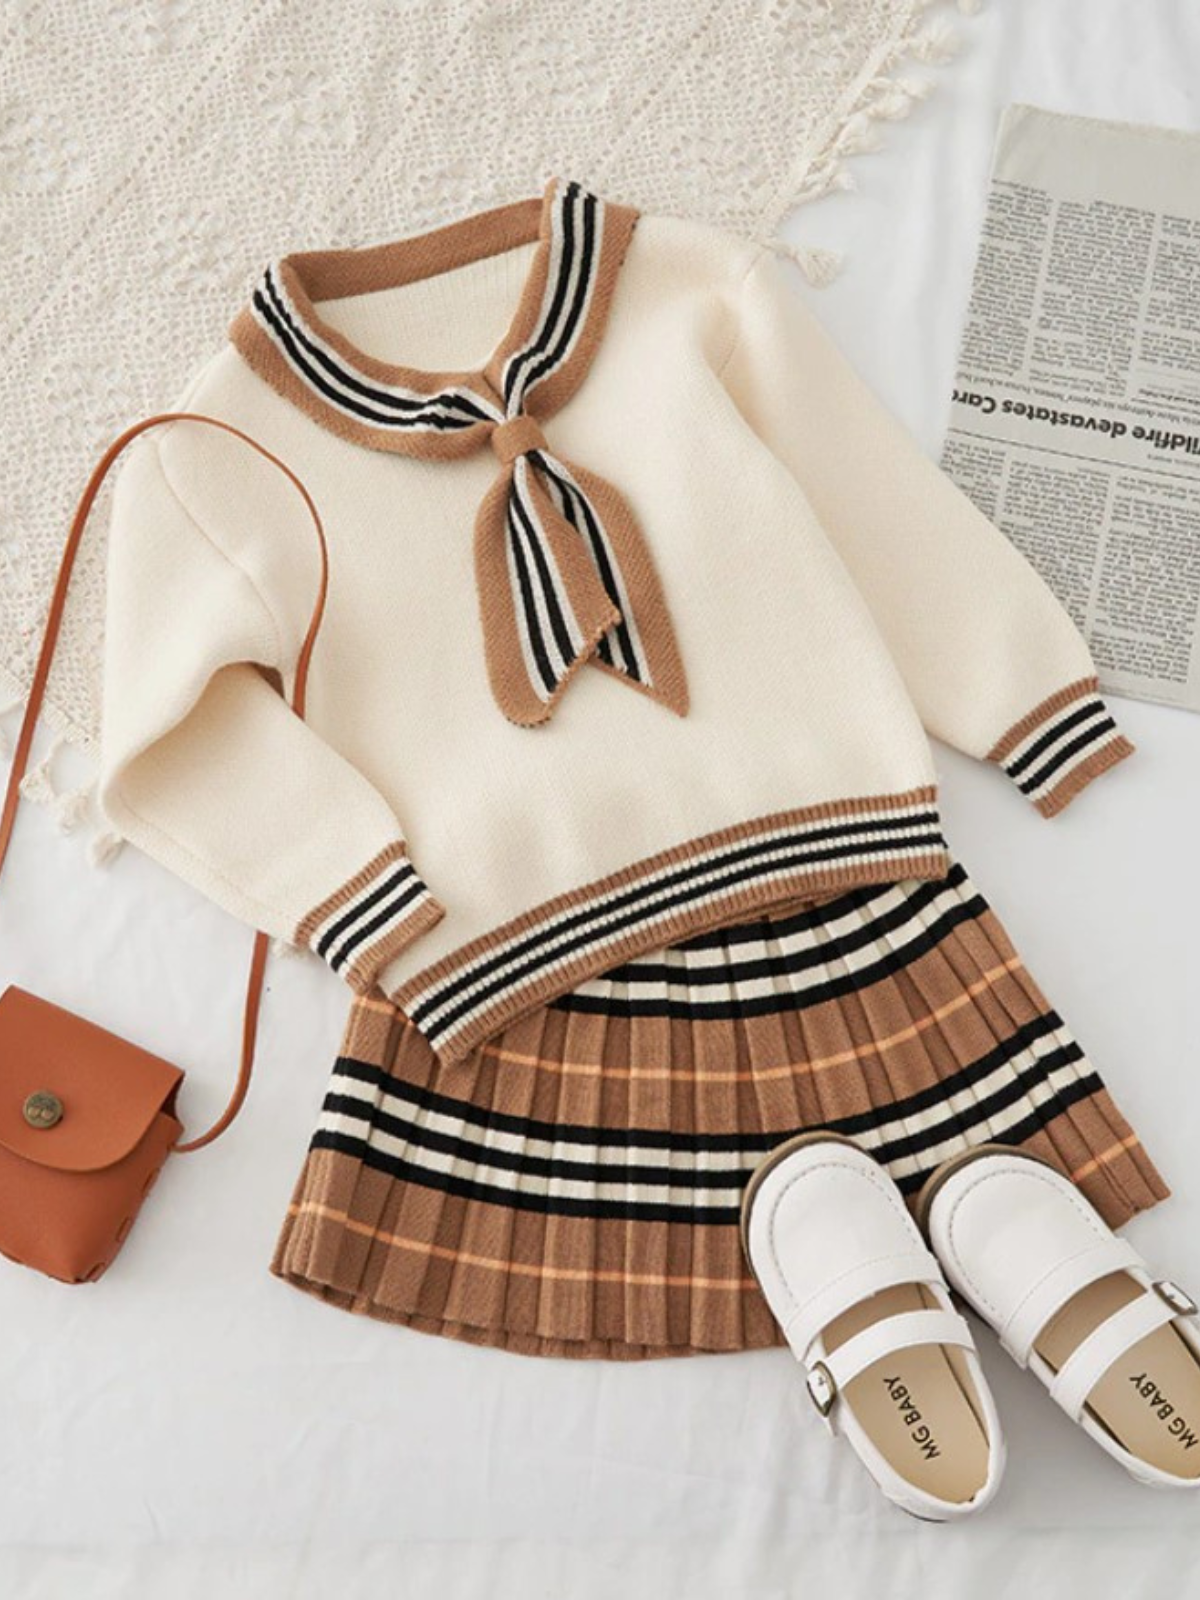 Chic and Preppy Striped Knit Sweater and Skirt Set